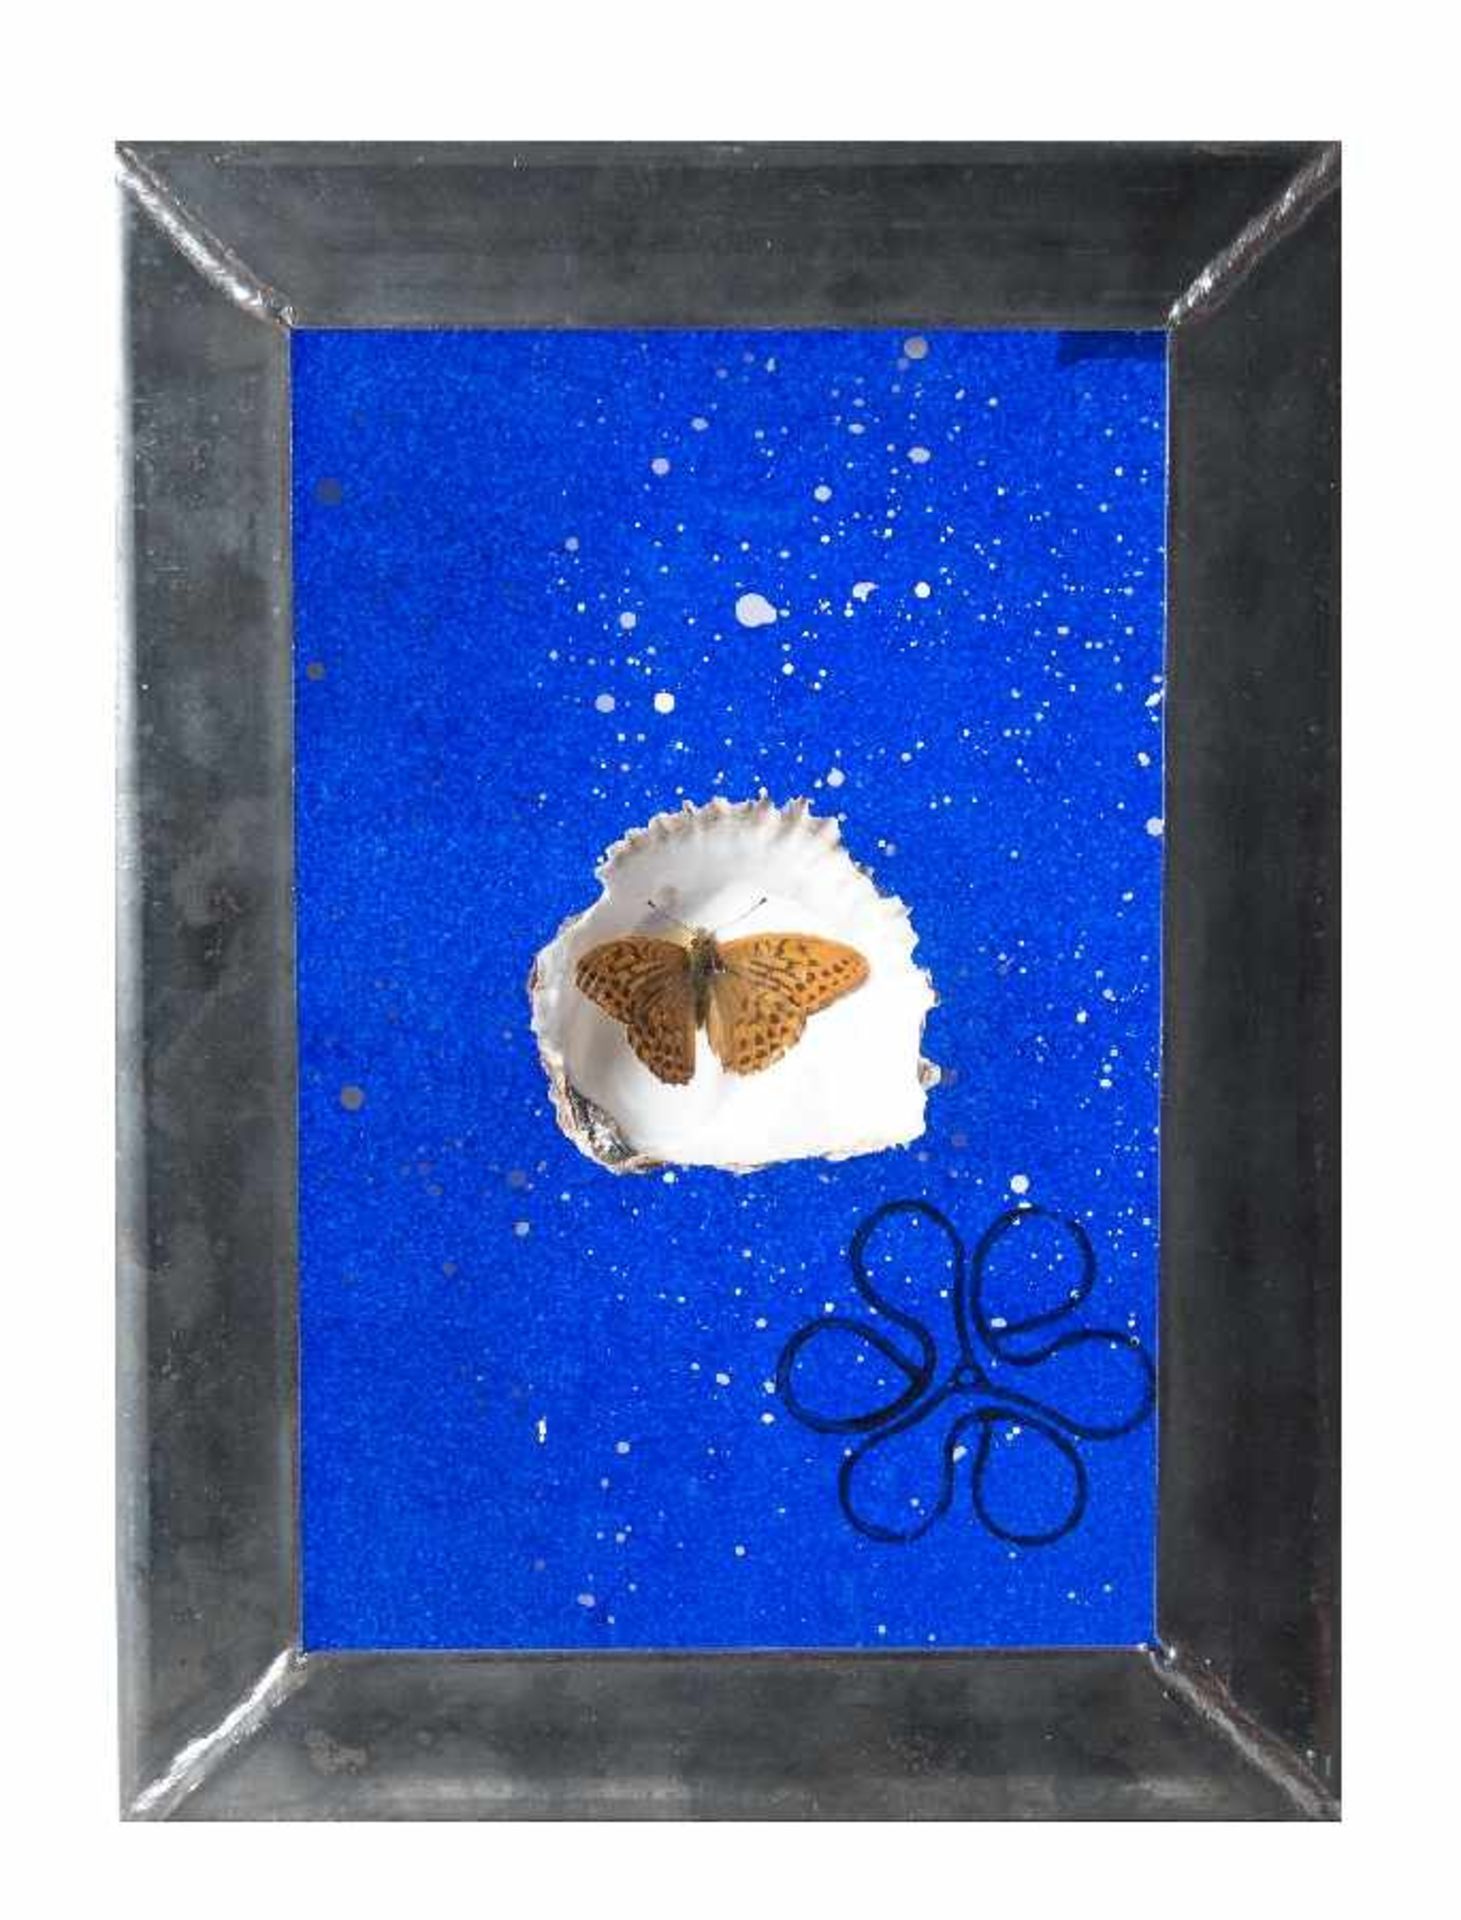 Ugo Dossi1943 MünchenUntitled (Collage)Prepared butterfly and shell, collaged on glass with paint